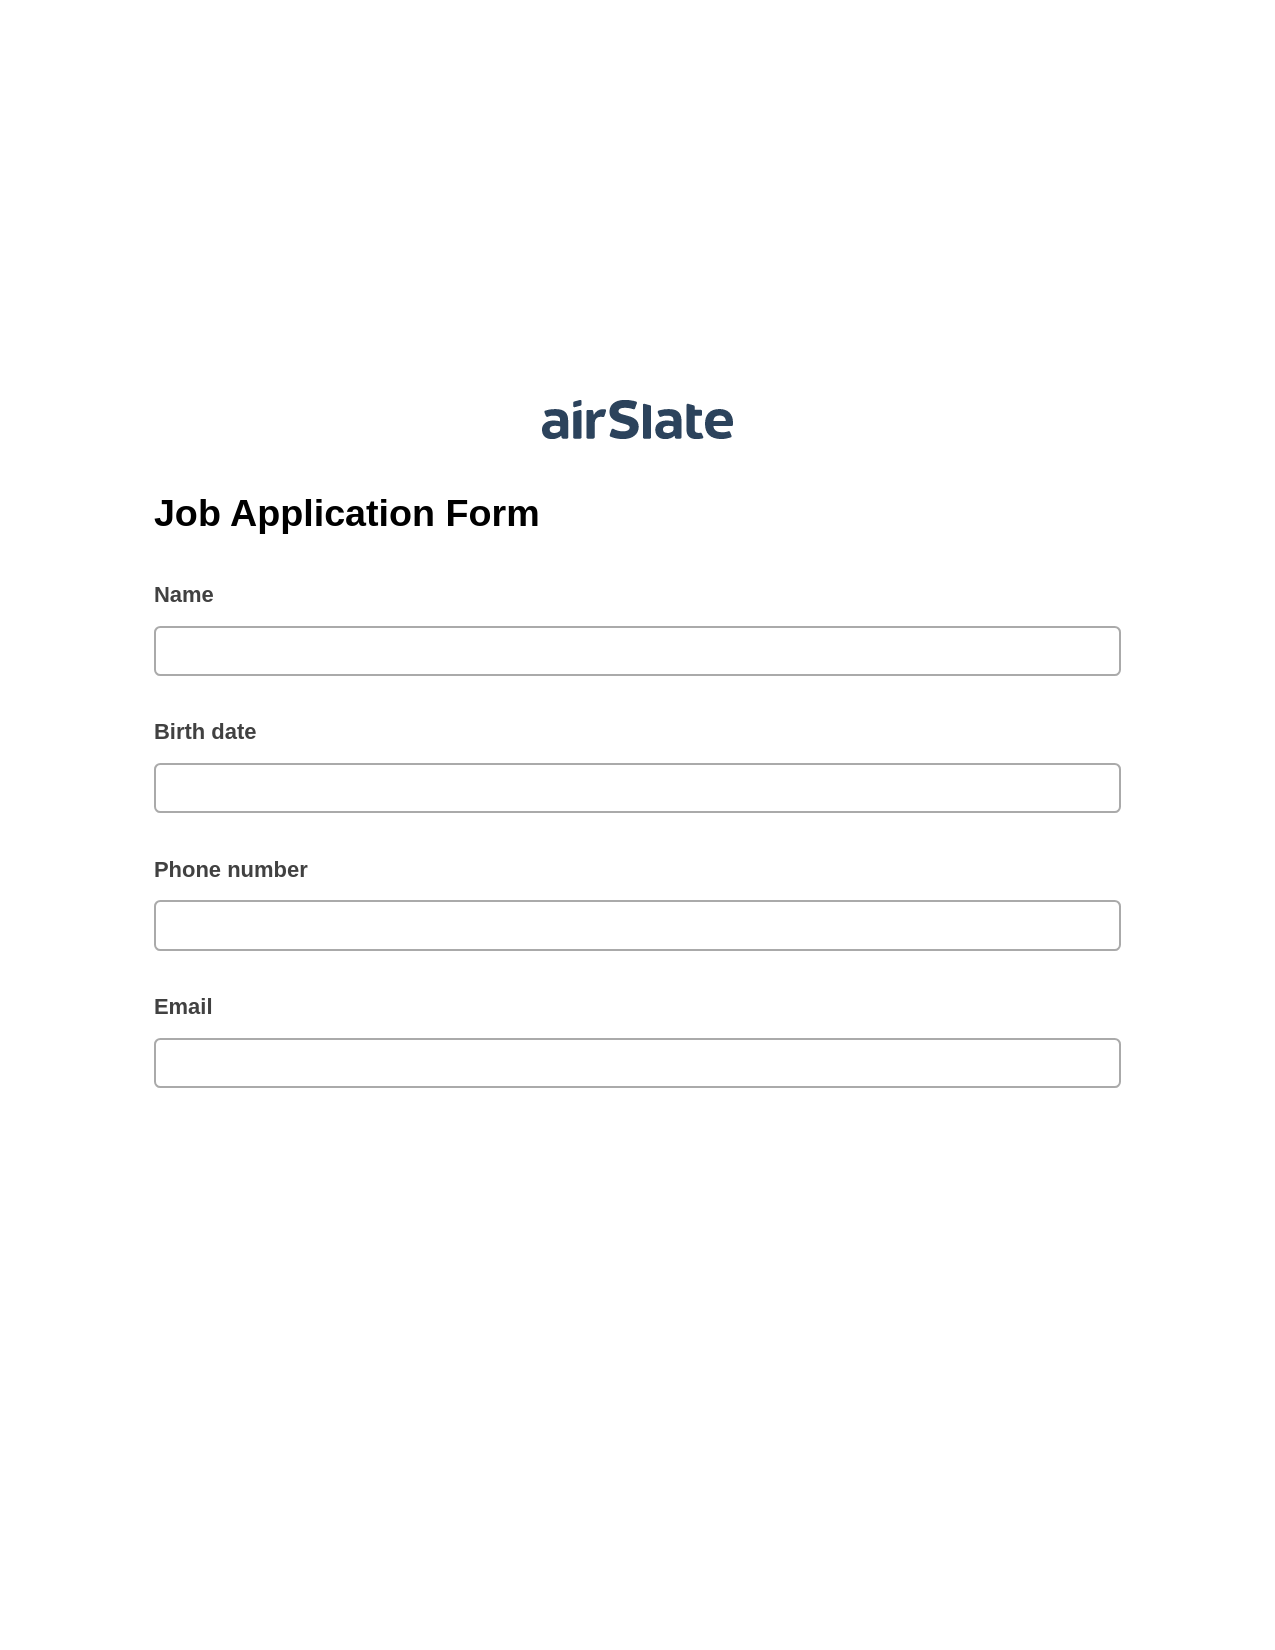 Multirole Job Application Form Pre-fill Dropdowns from Office 365 Excel Bot, Update NetSuite Records Bot, Export to MySQL Bot